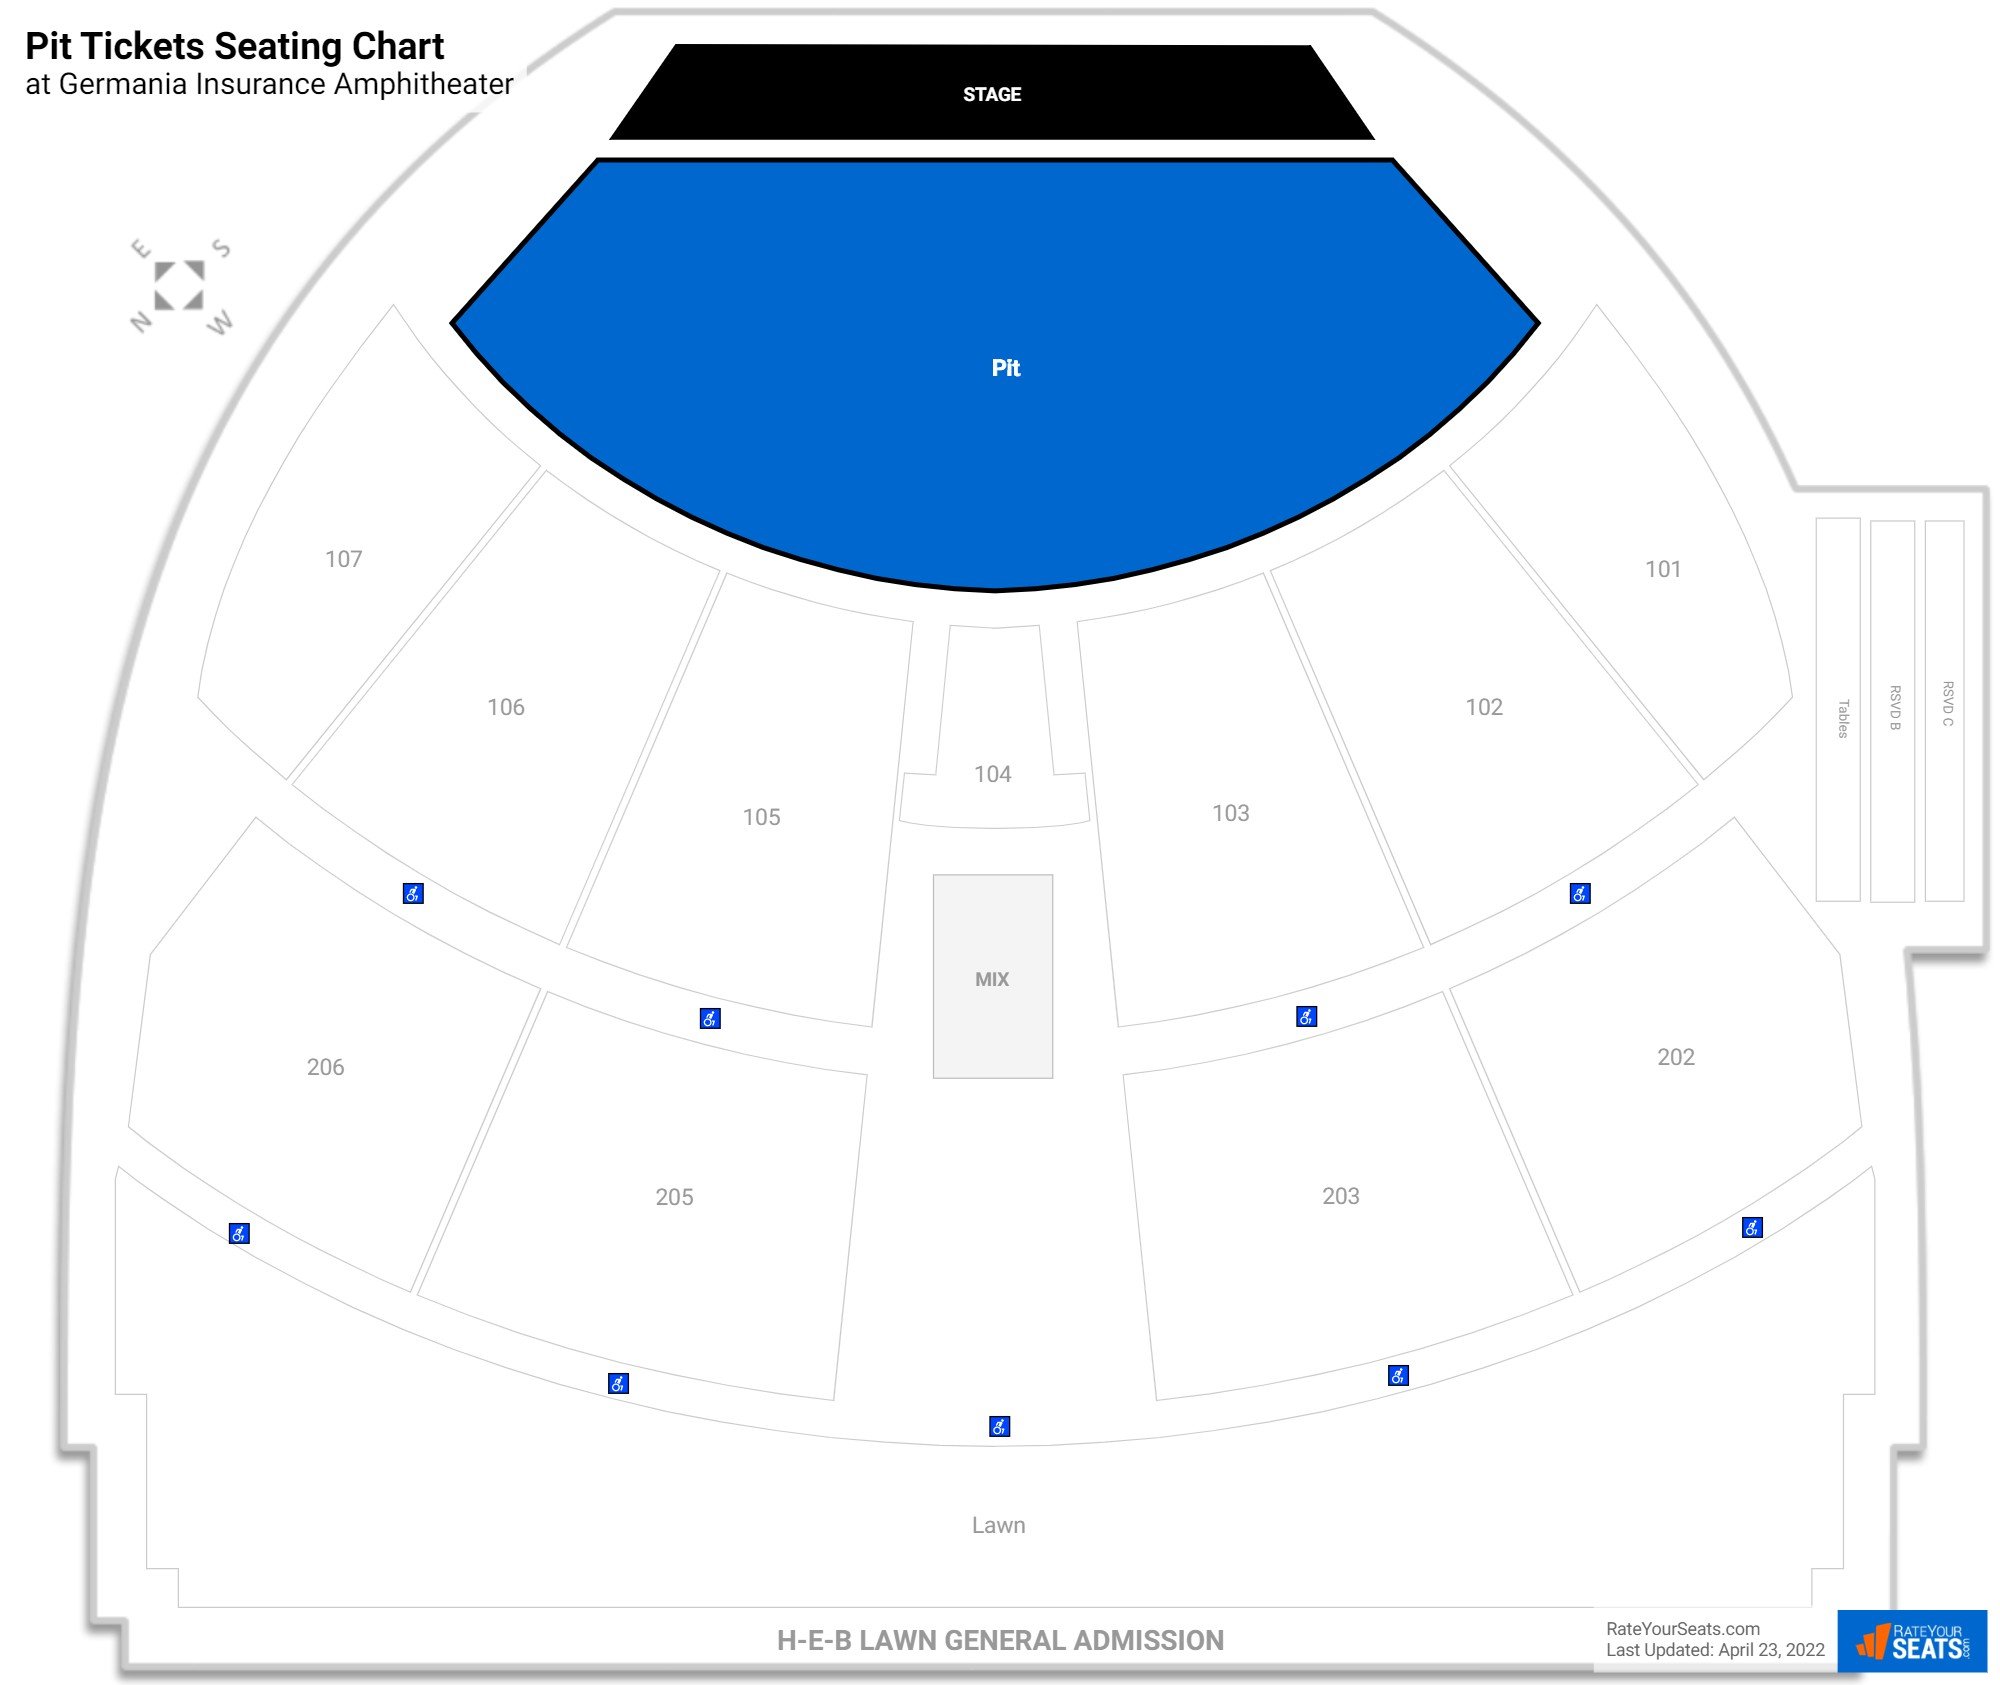 Concert Pit Tickets Seating Chart at Germania Insurance Amphitheater